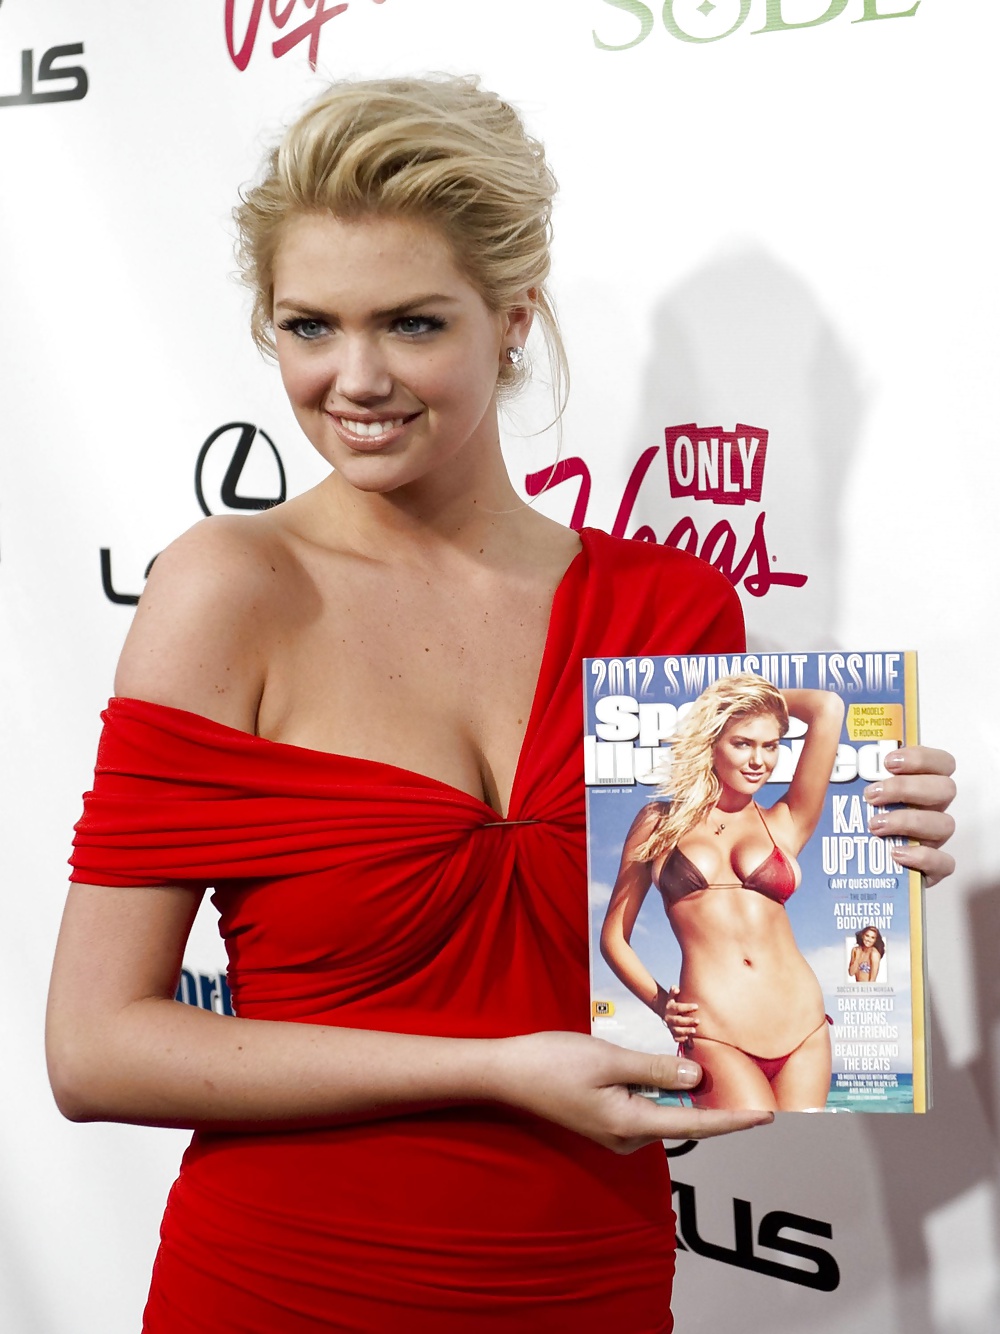 Kate Upton Ultimate Part 2 of 5 (CCM)  #28899092